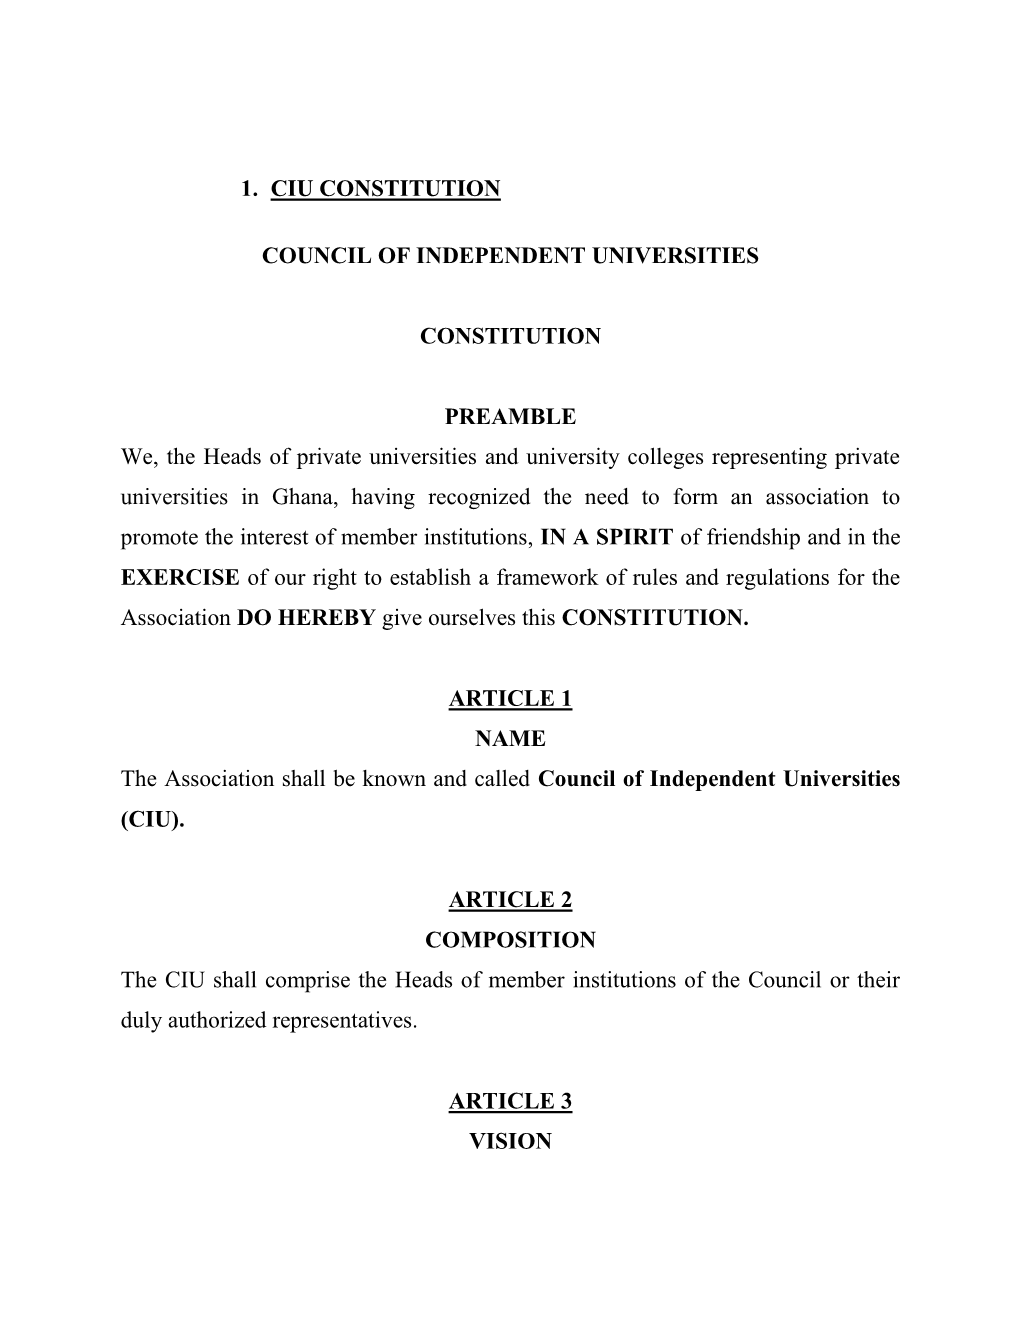 1. Ciu Constitution Council of Independent Universities